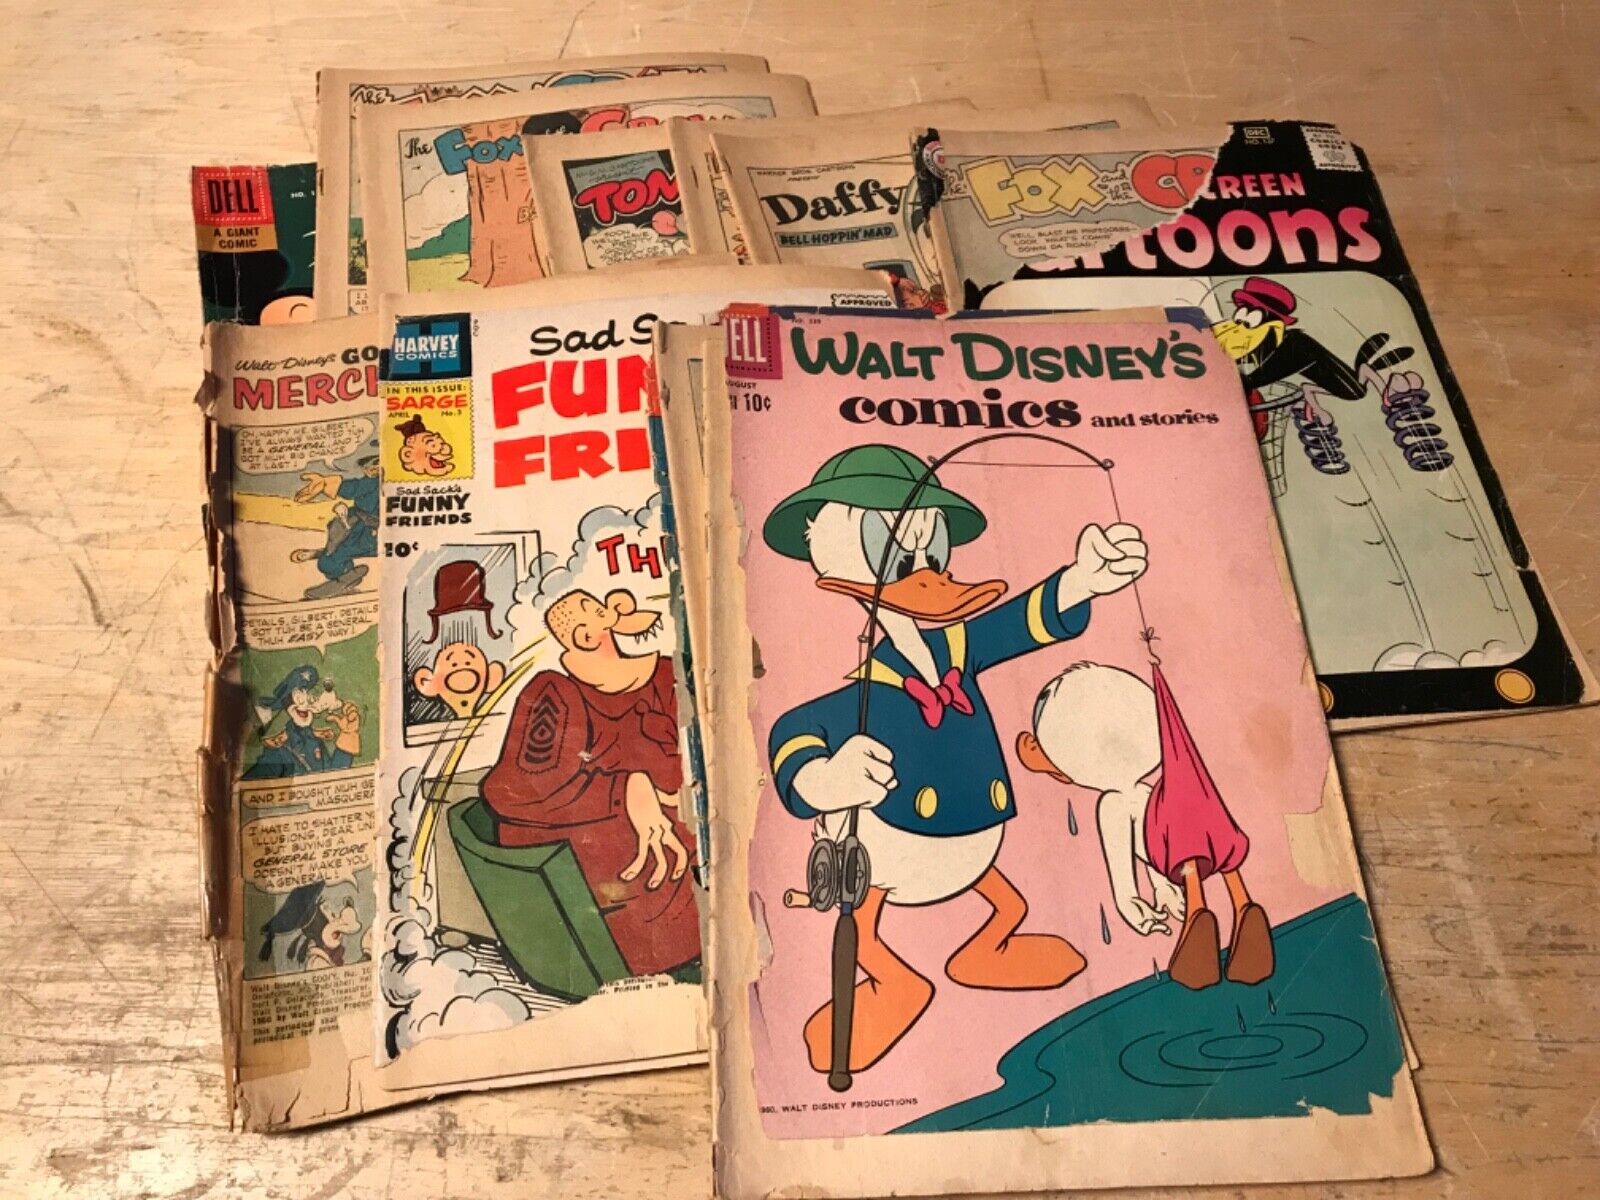 lot of vintage reader copies, old comic books, ripped covers, some 10 cent comic